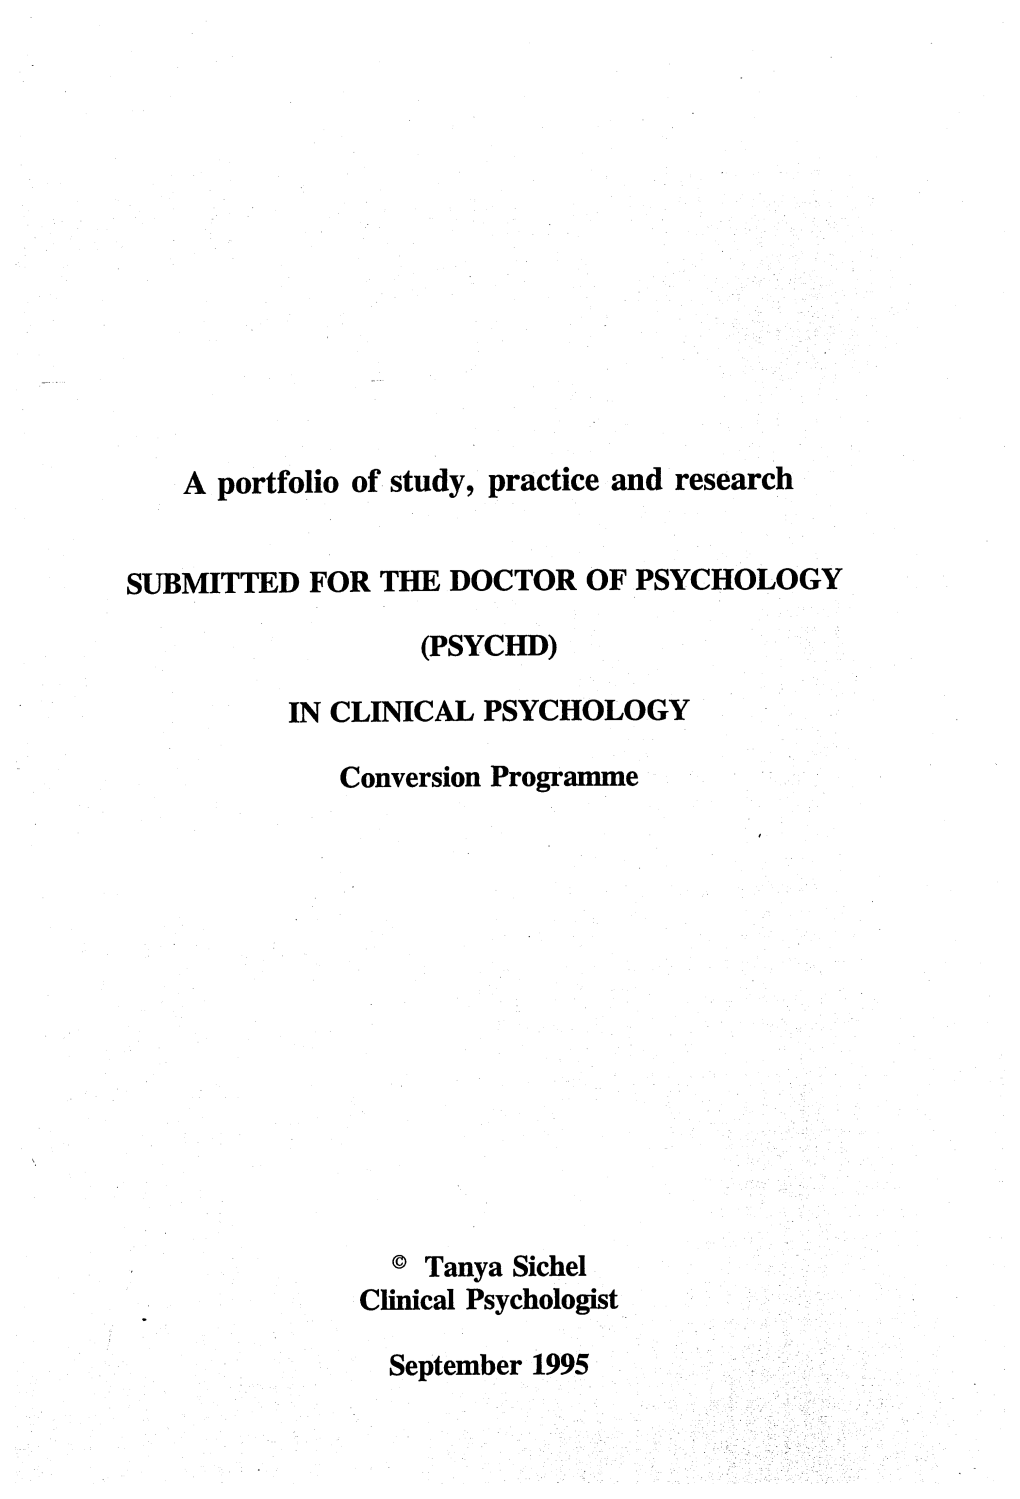 A Portfolio of Study, Practice and Research